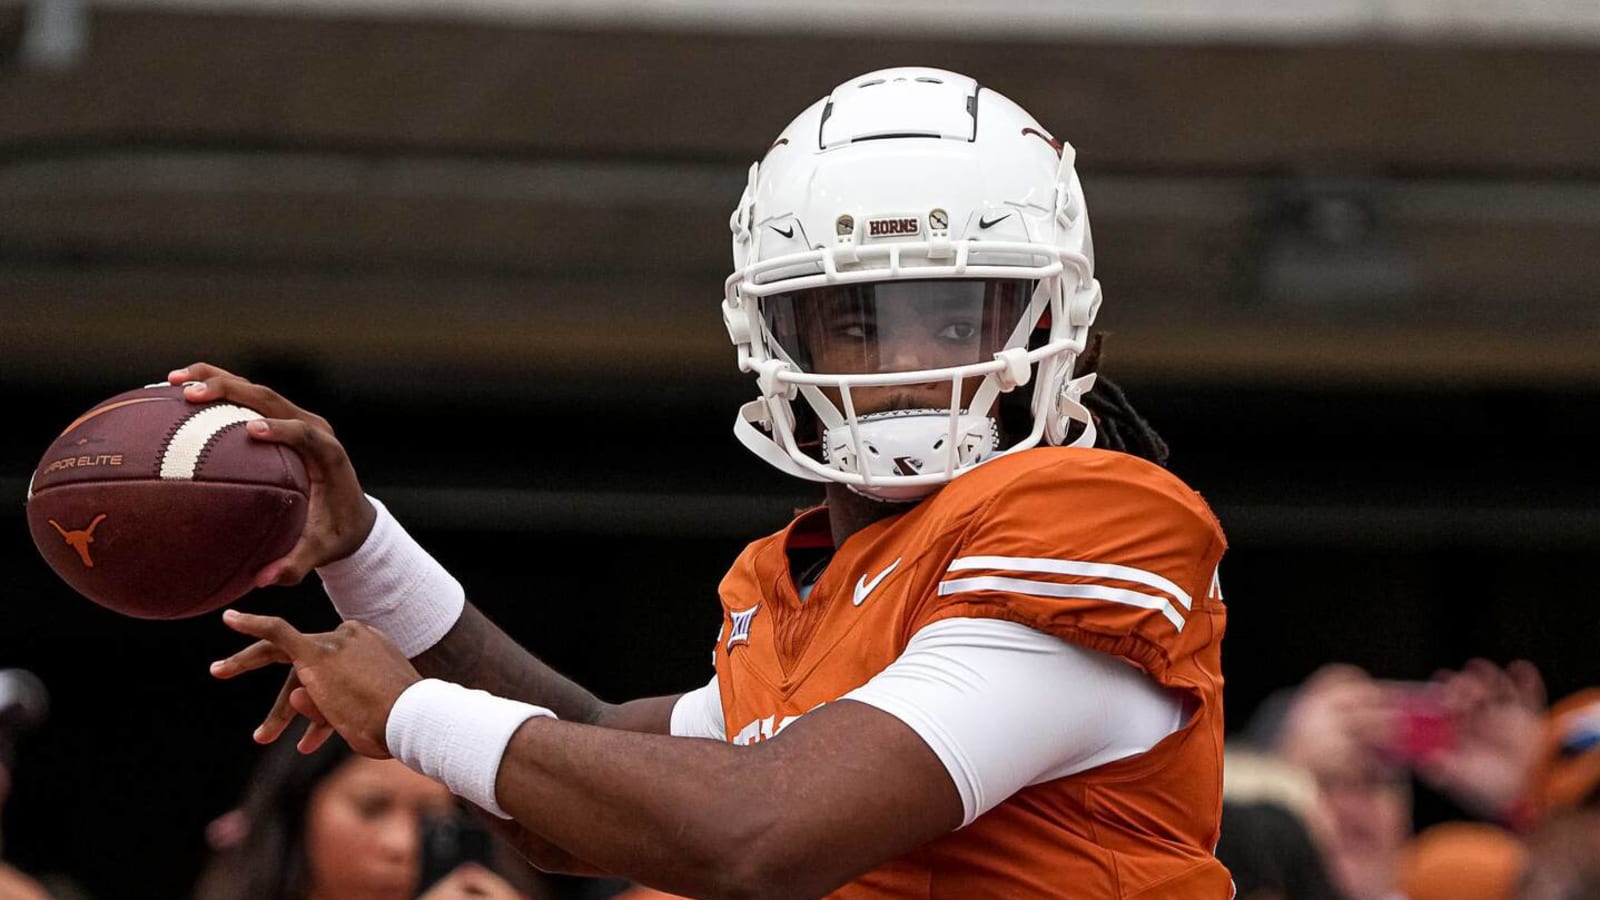 How does Murphy's transfer affect Manning and Texas?